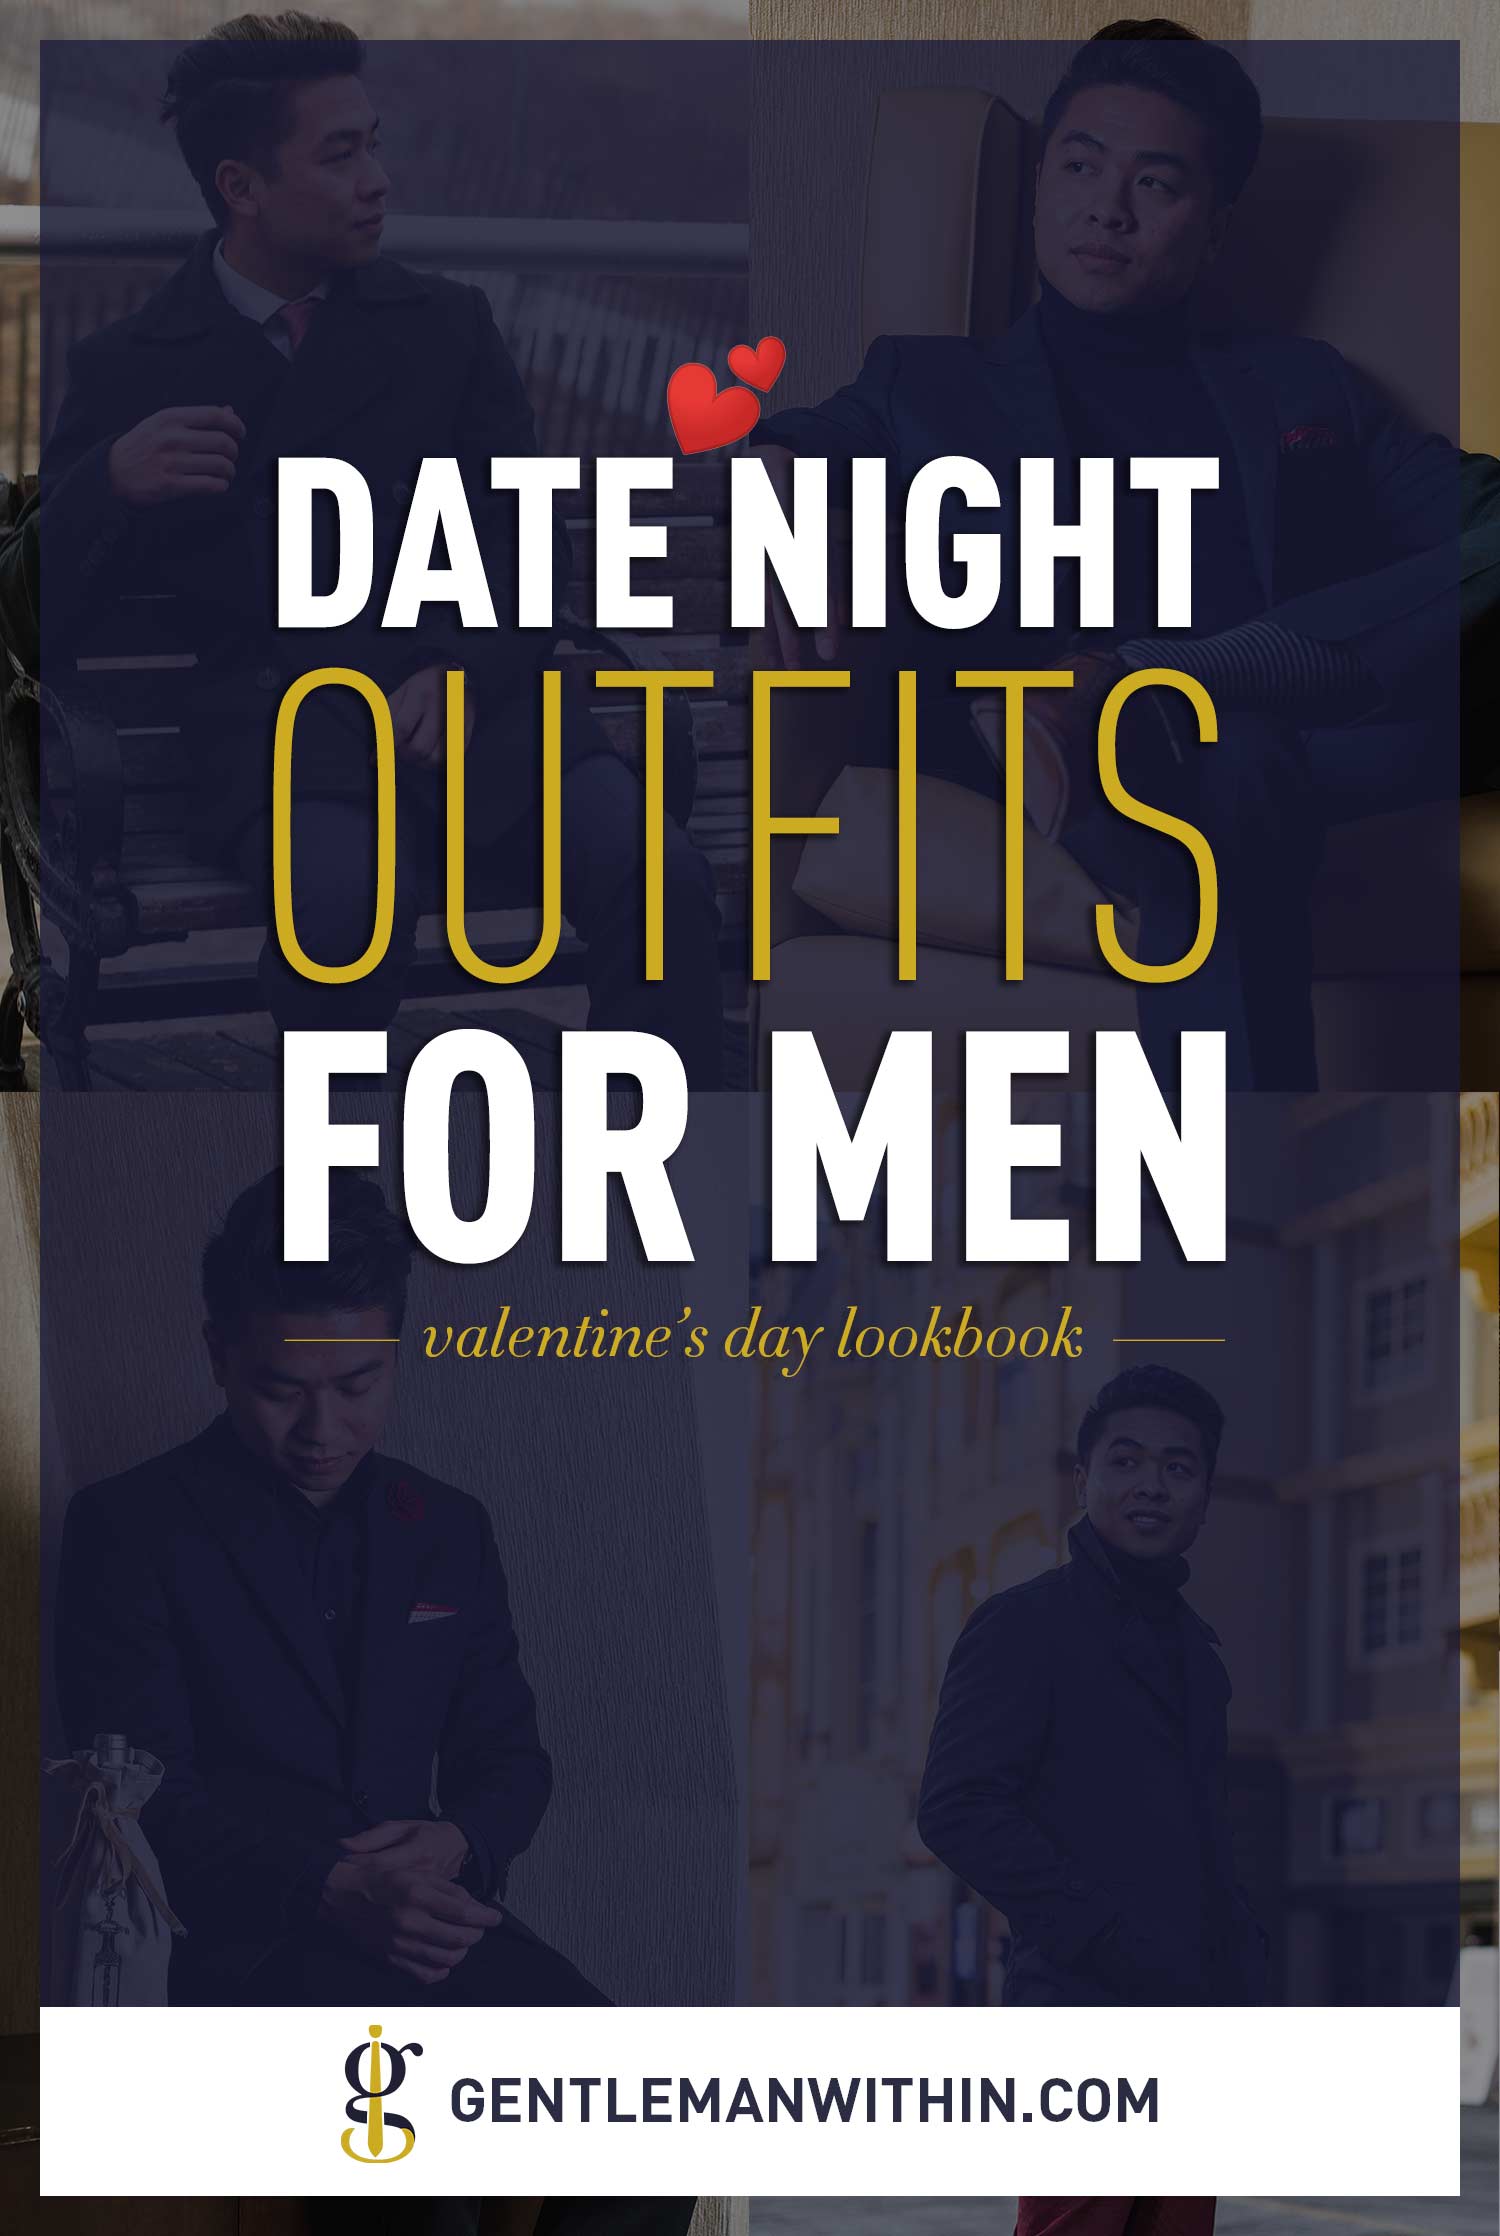 Valentine's Day Outfits For Men & Date Night Outfit Ideas | GENTLEMAN WITHIN